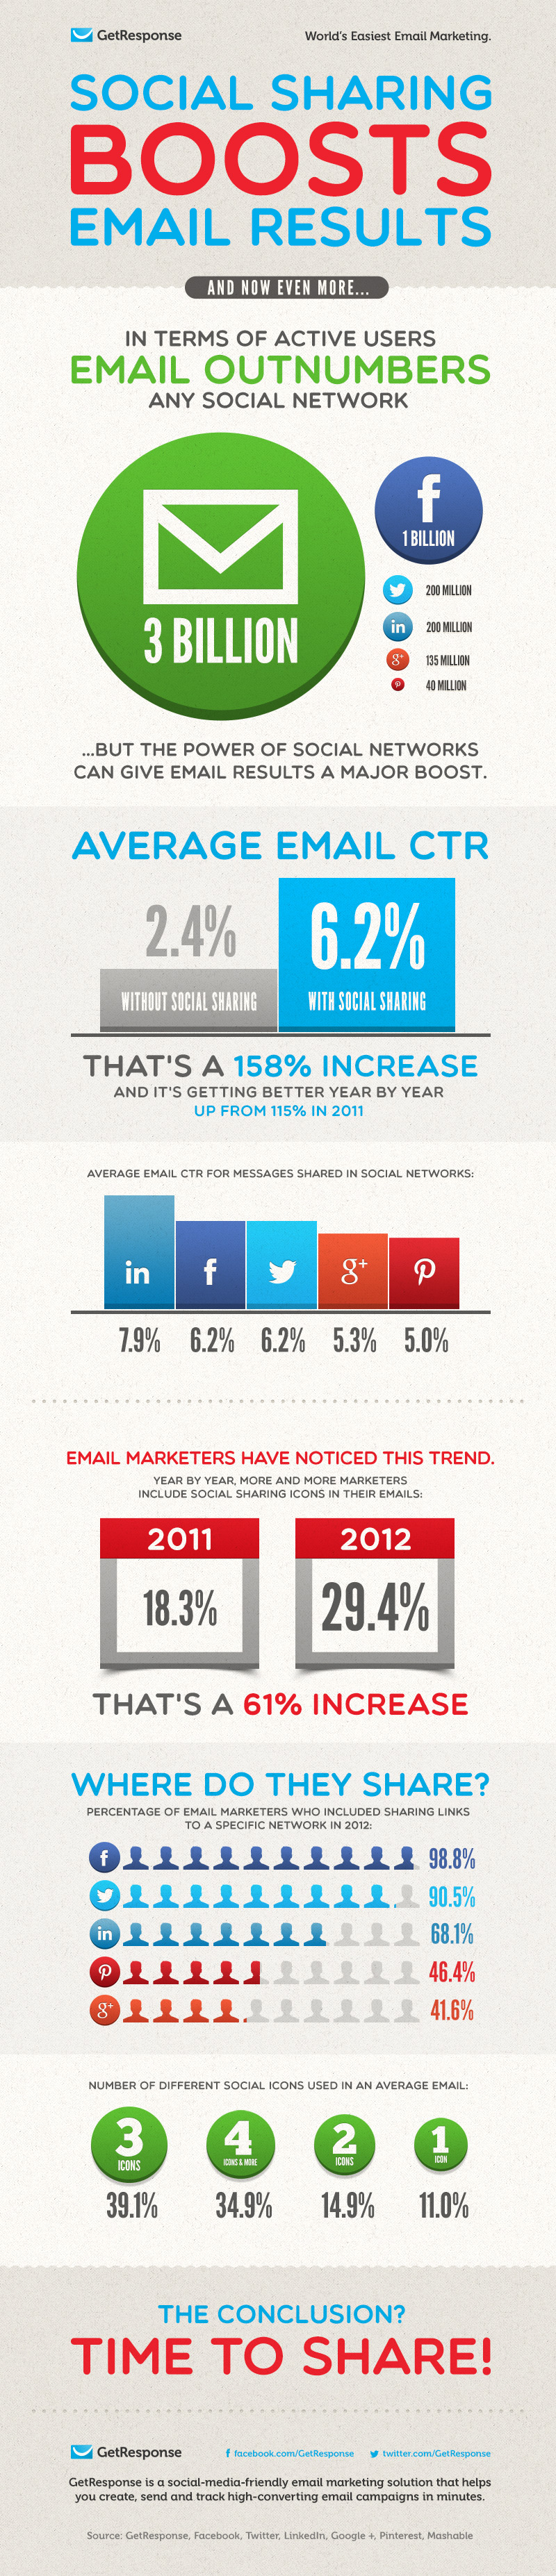 social-sharing-boosts-email